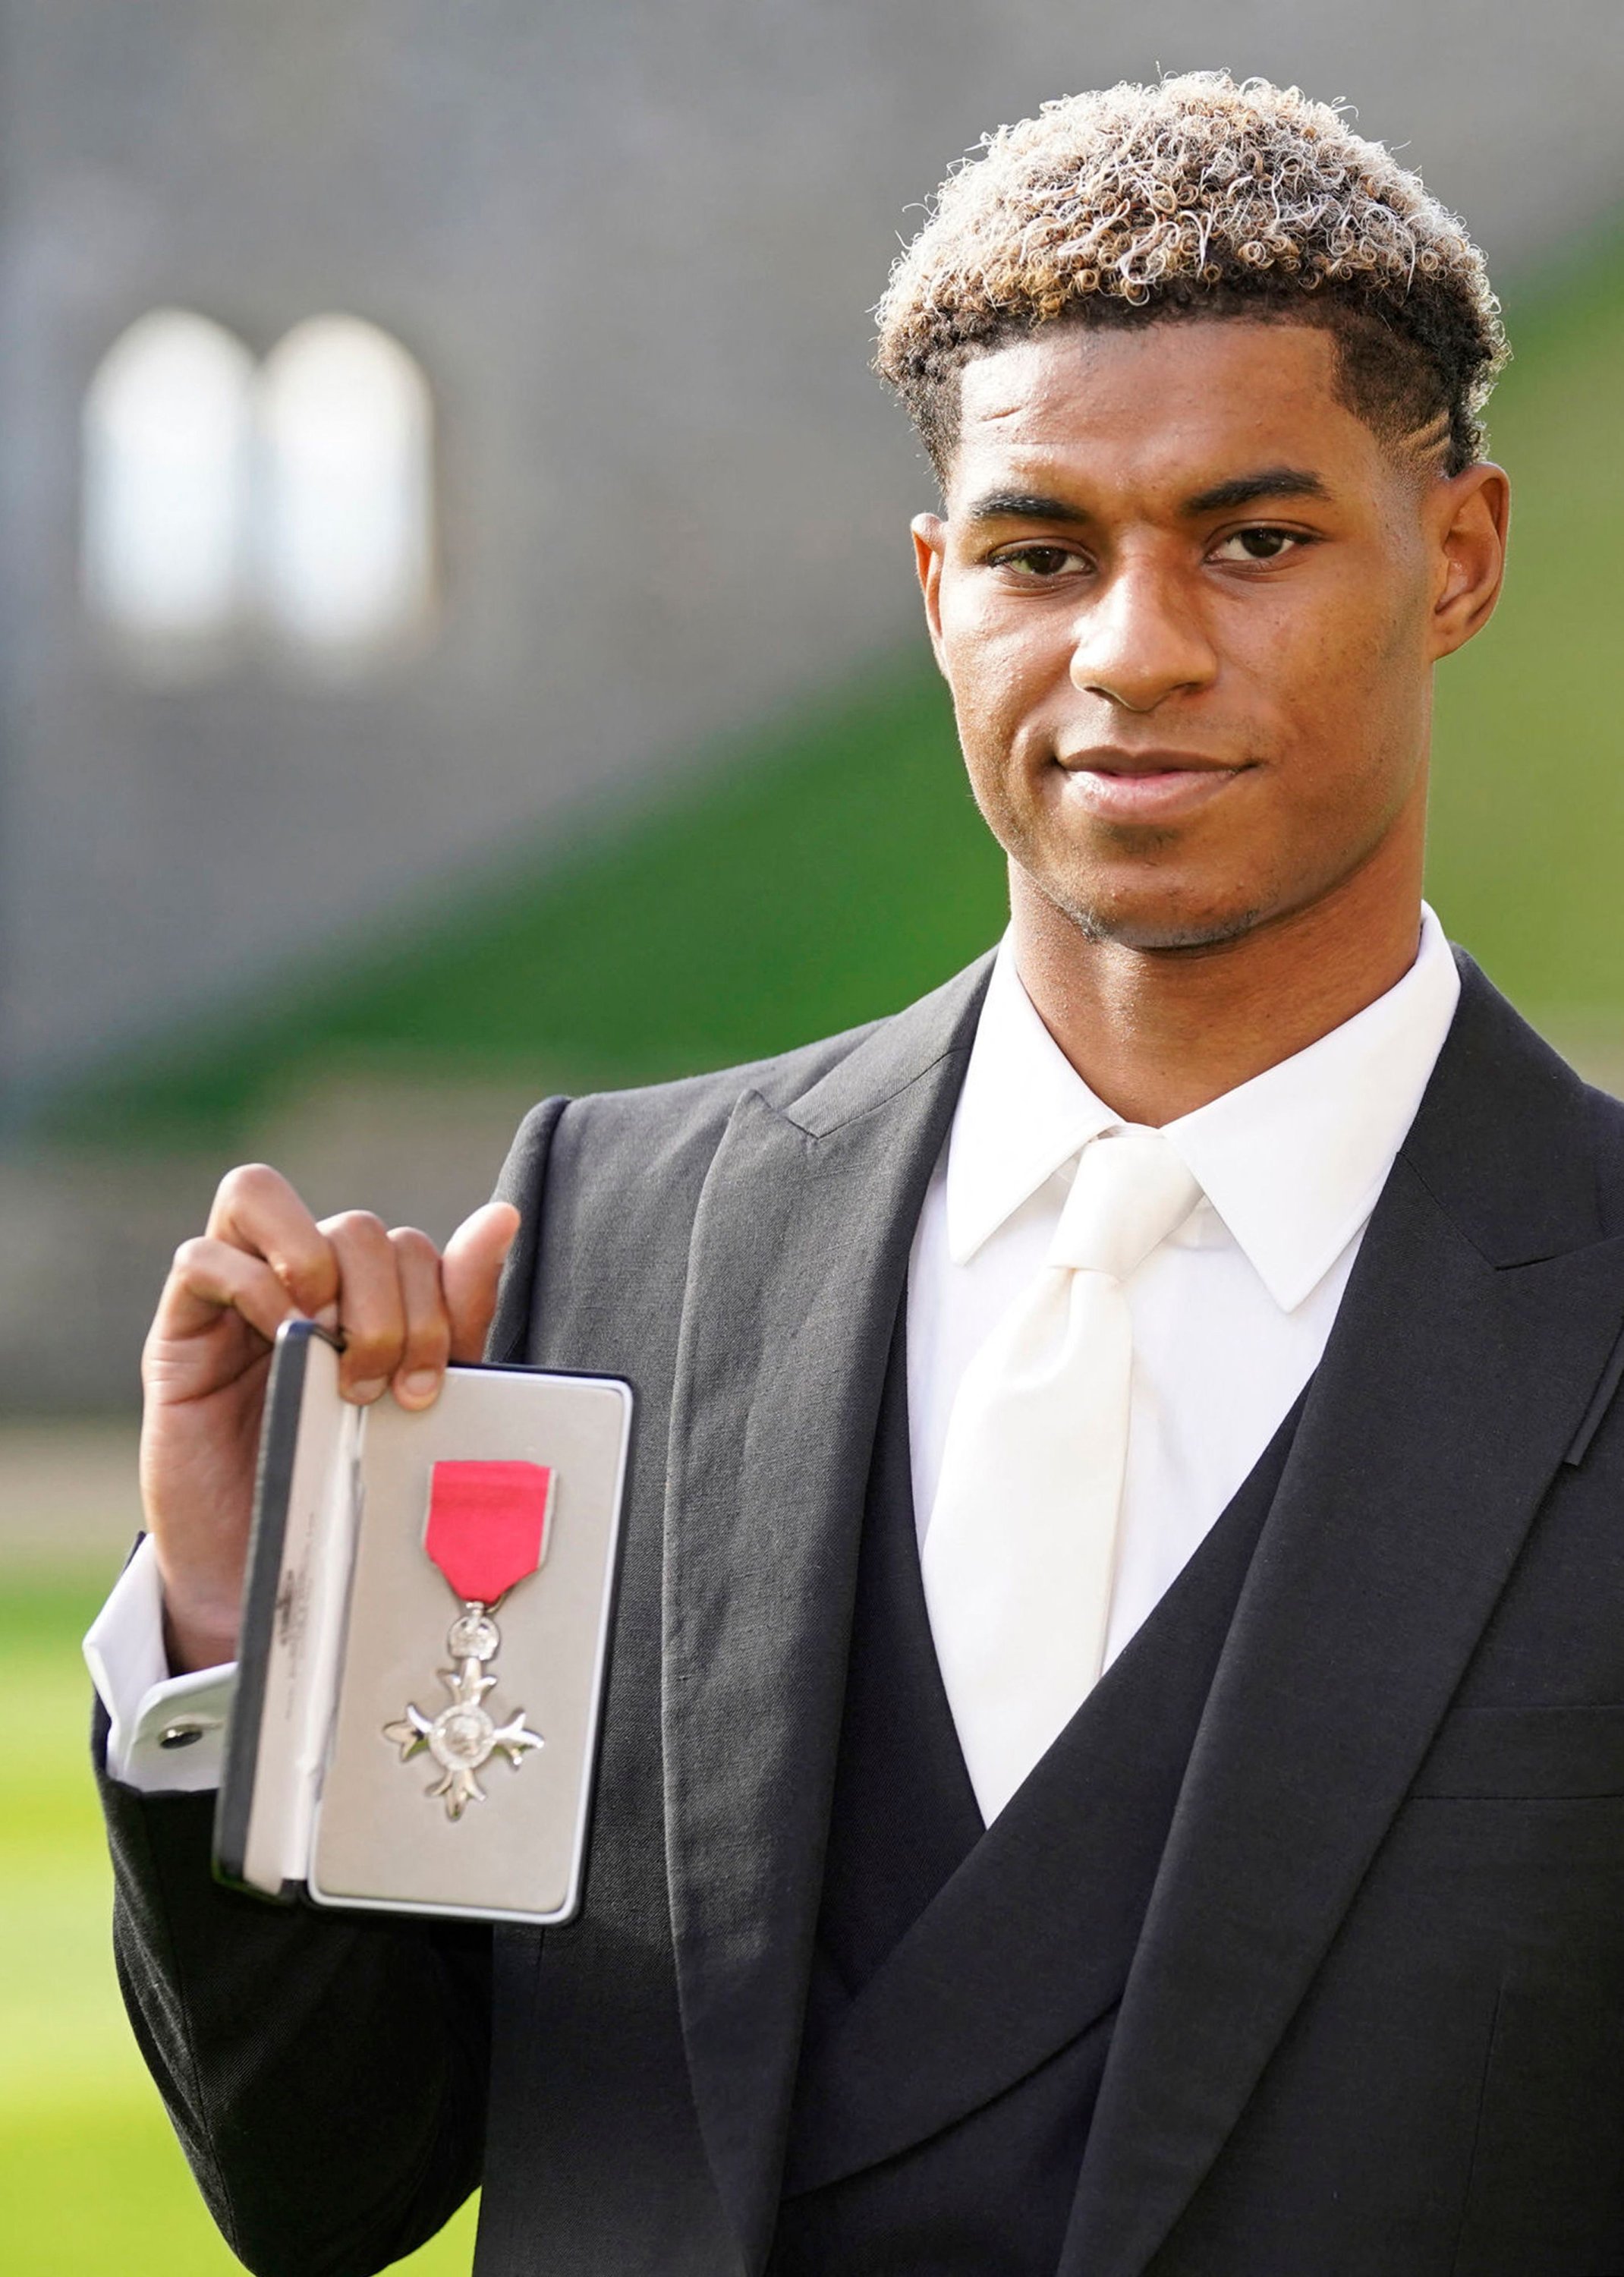 Manchester United and England footballer Marcus Rashford poses with his medal after being appointed a Member of the Order of the British Empire (MBE) at Windsor Castle, London, England, Nov. 9, 2021. (AFP Photo)